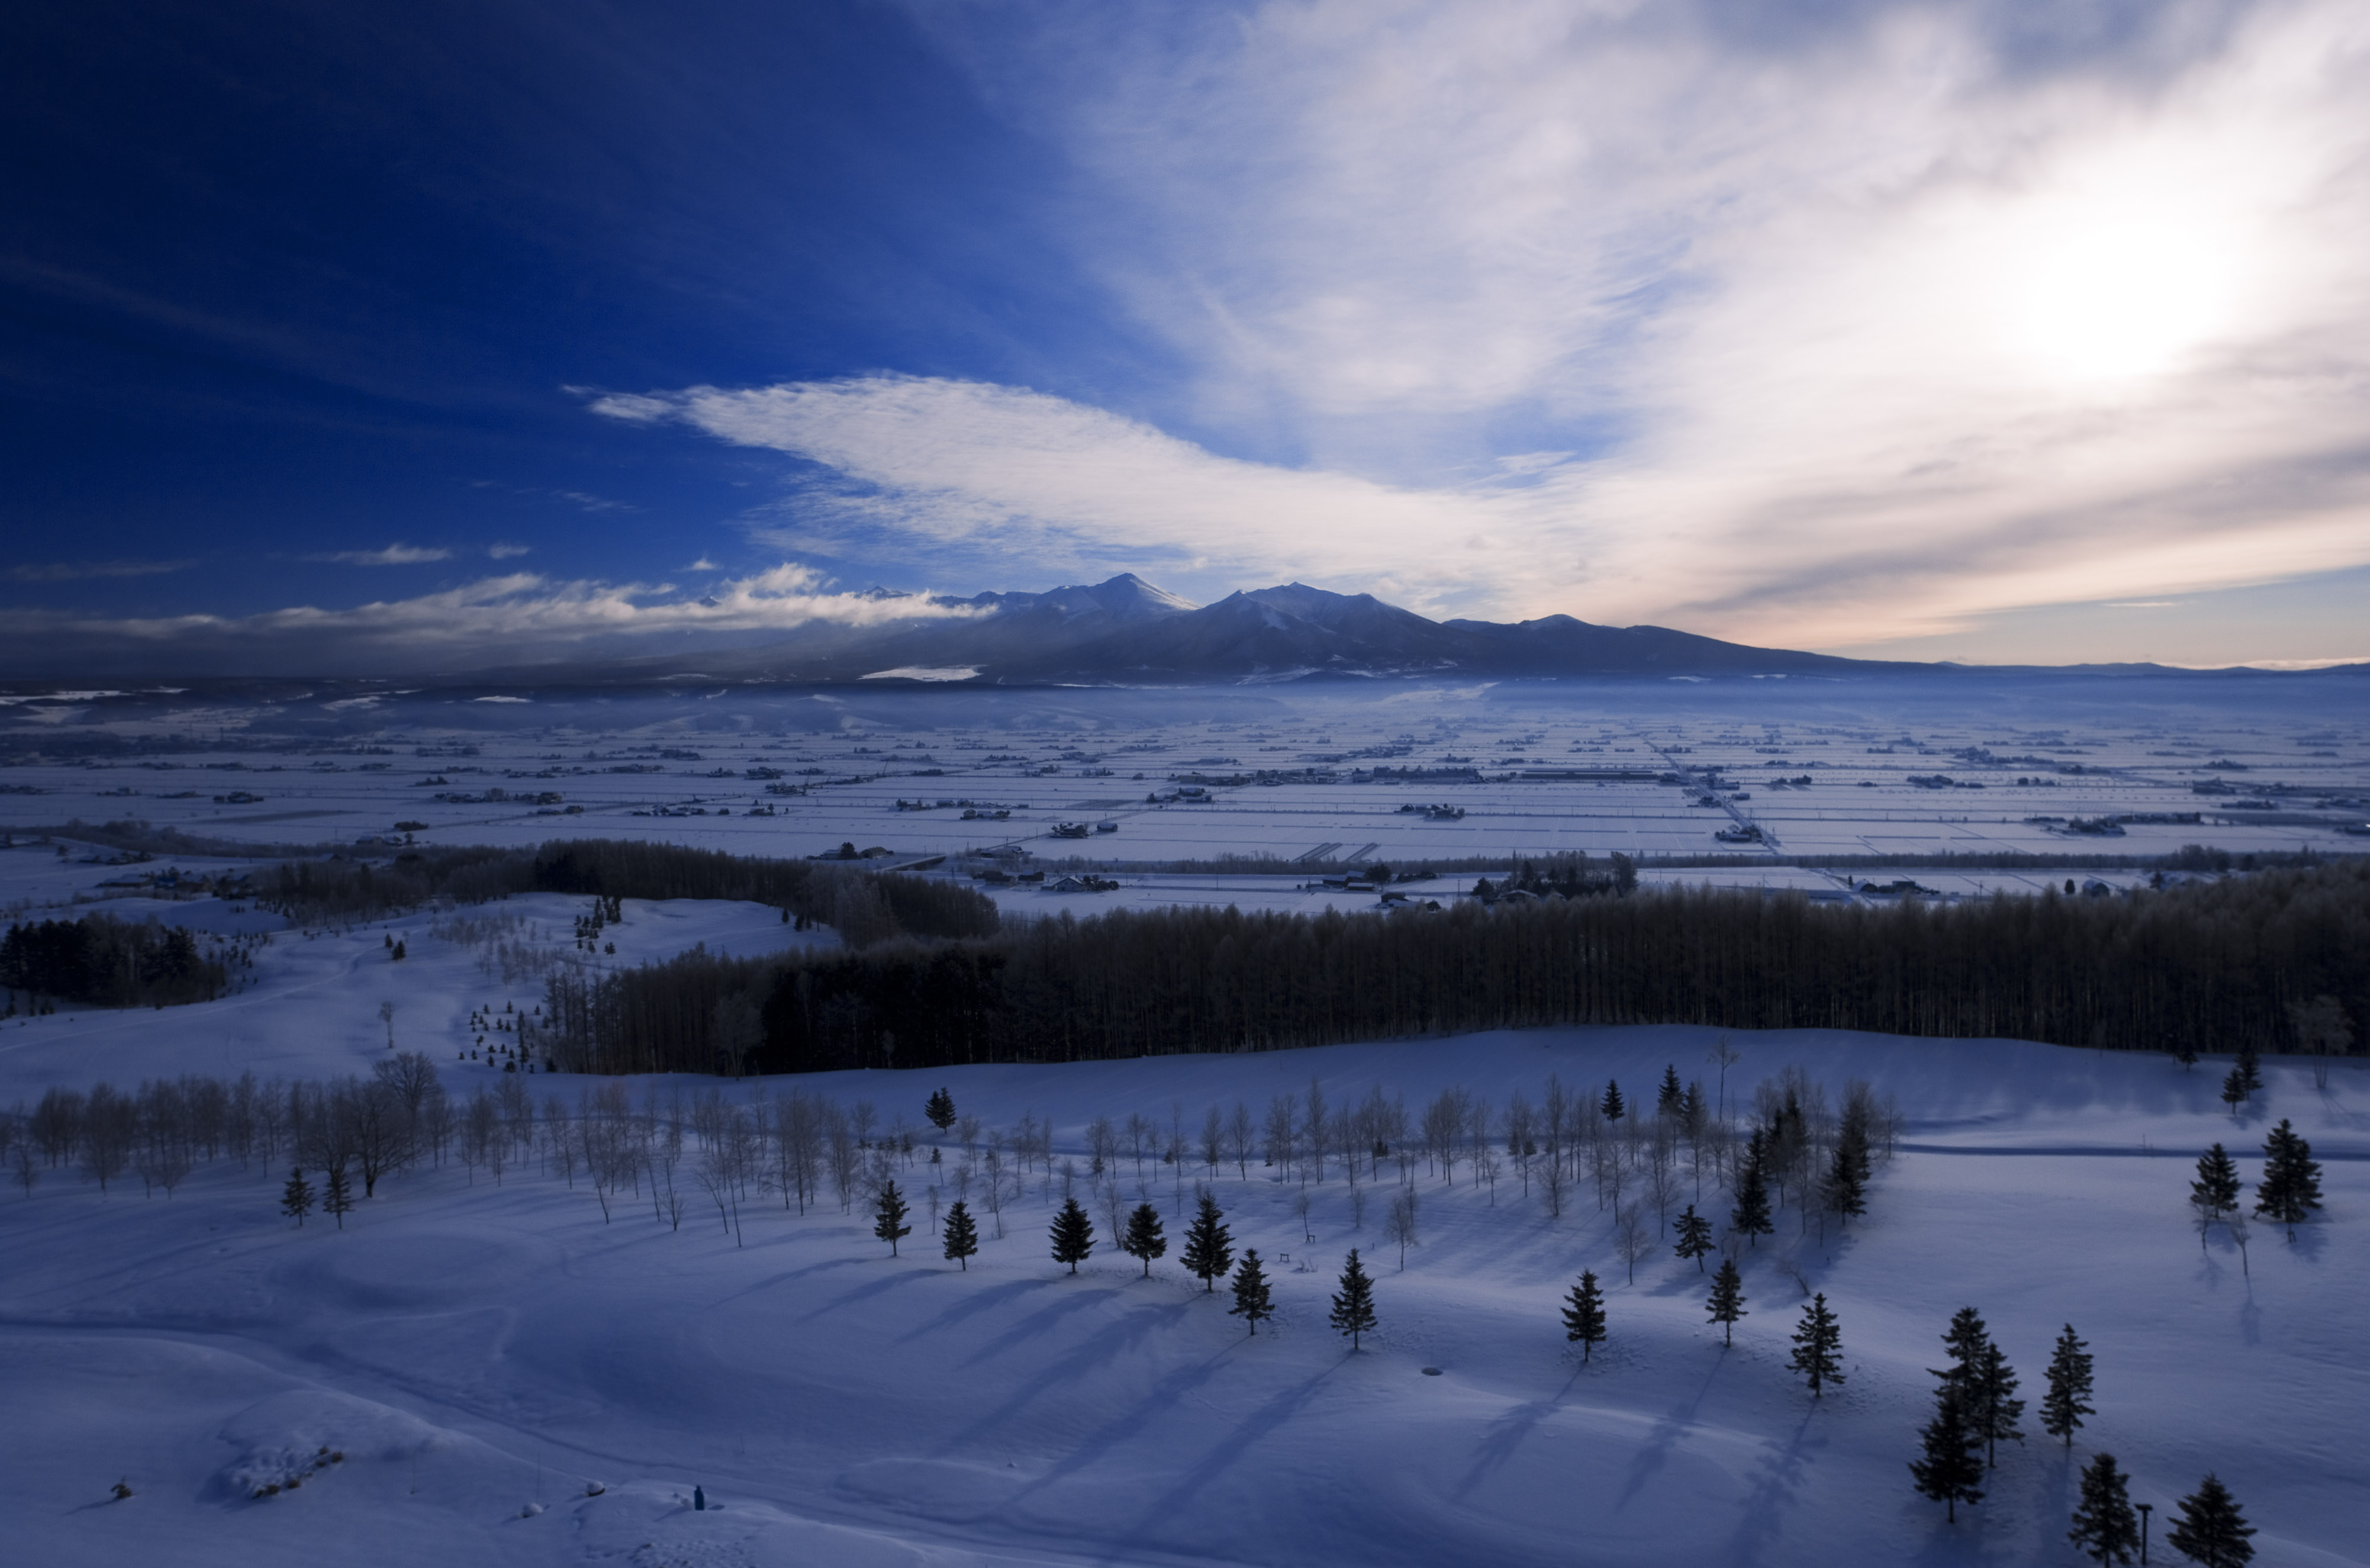 photo,material,free,landscape,picture,stock photo,Creative Commons,Morning of Furano, snowy field, mountain, tree, field